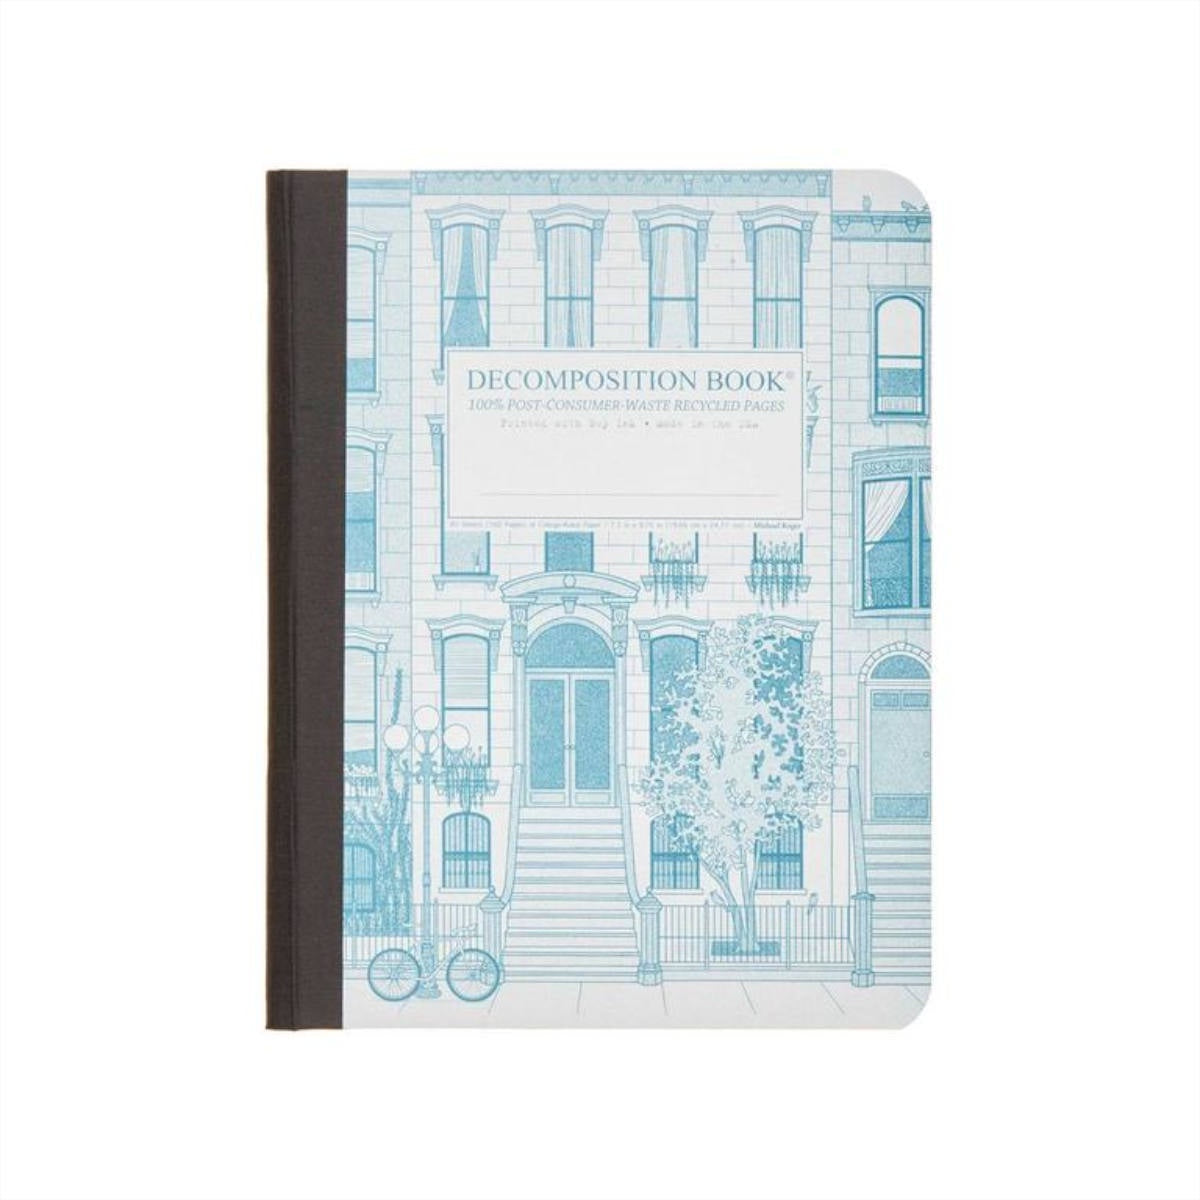 Decomposition Book - Large Notebook - Ruled - Brownstone